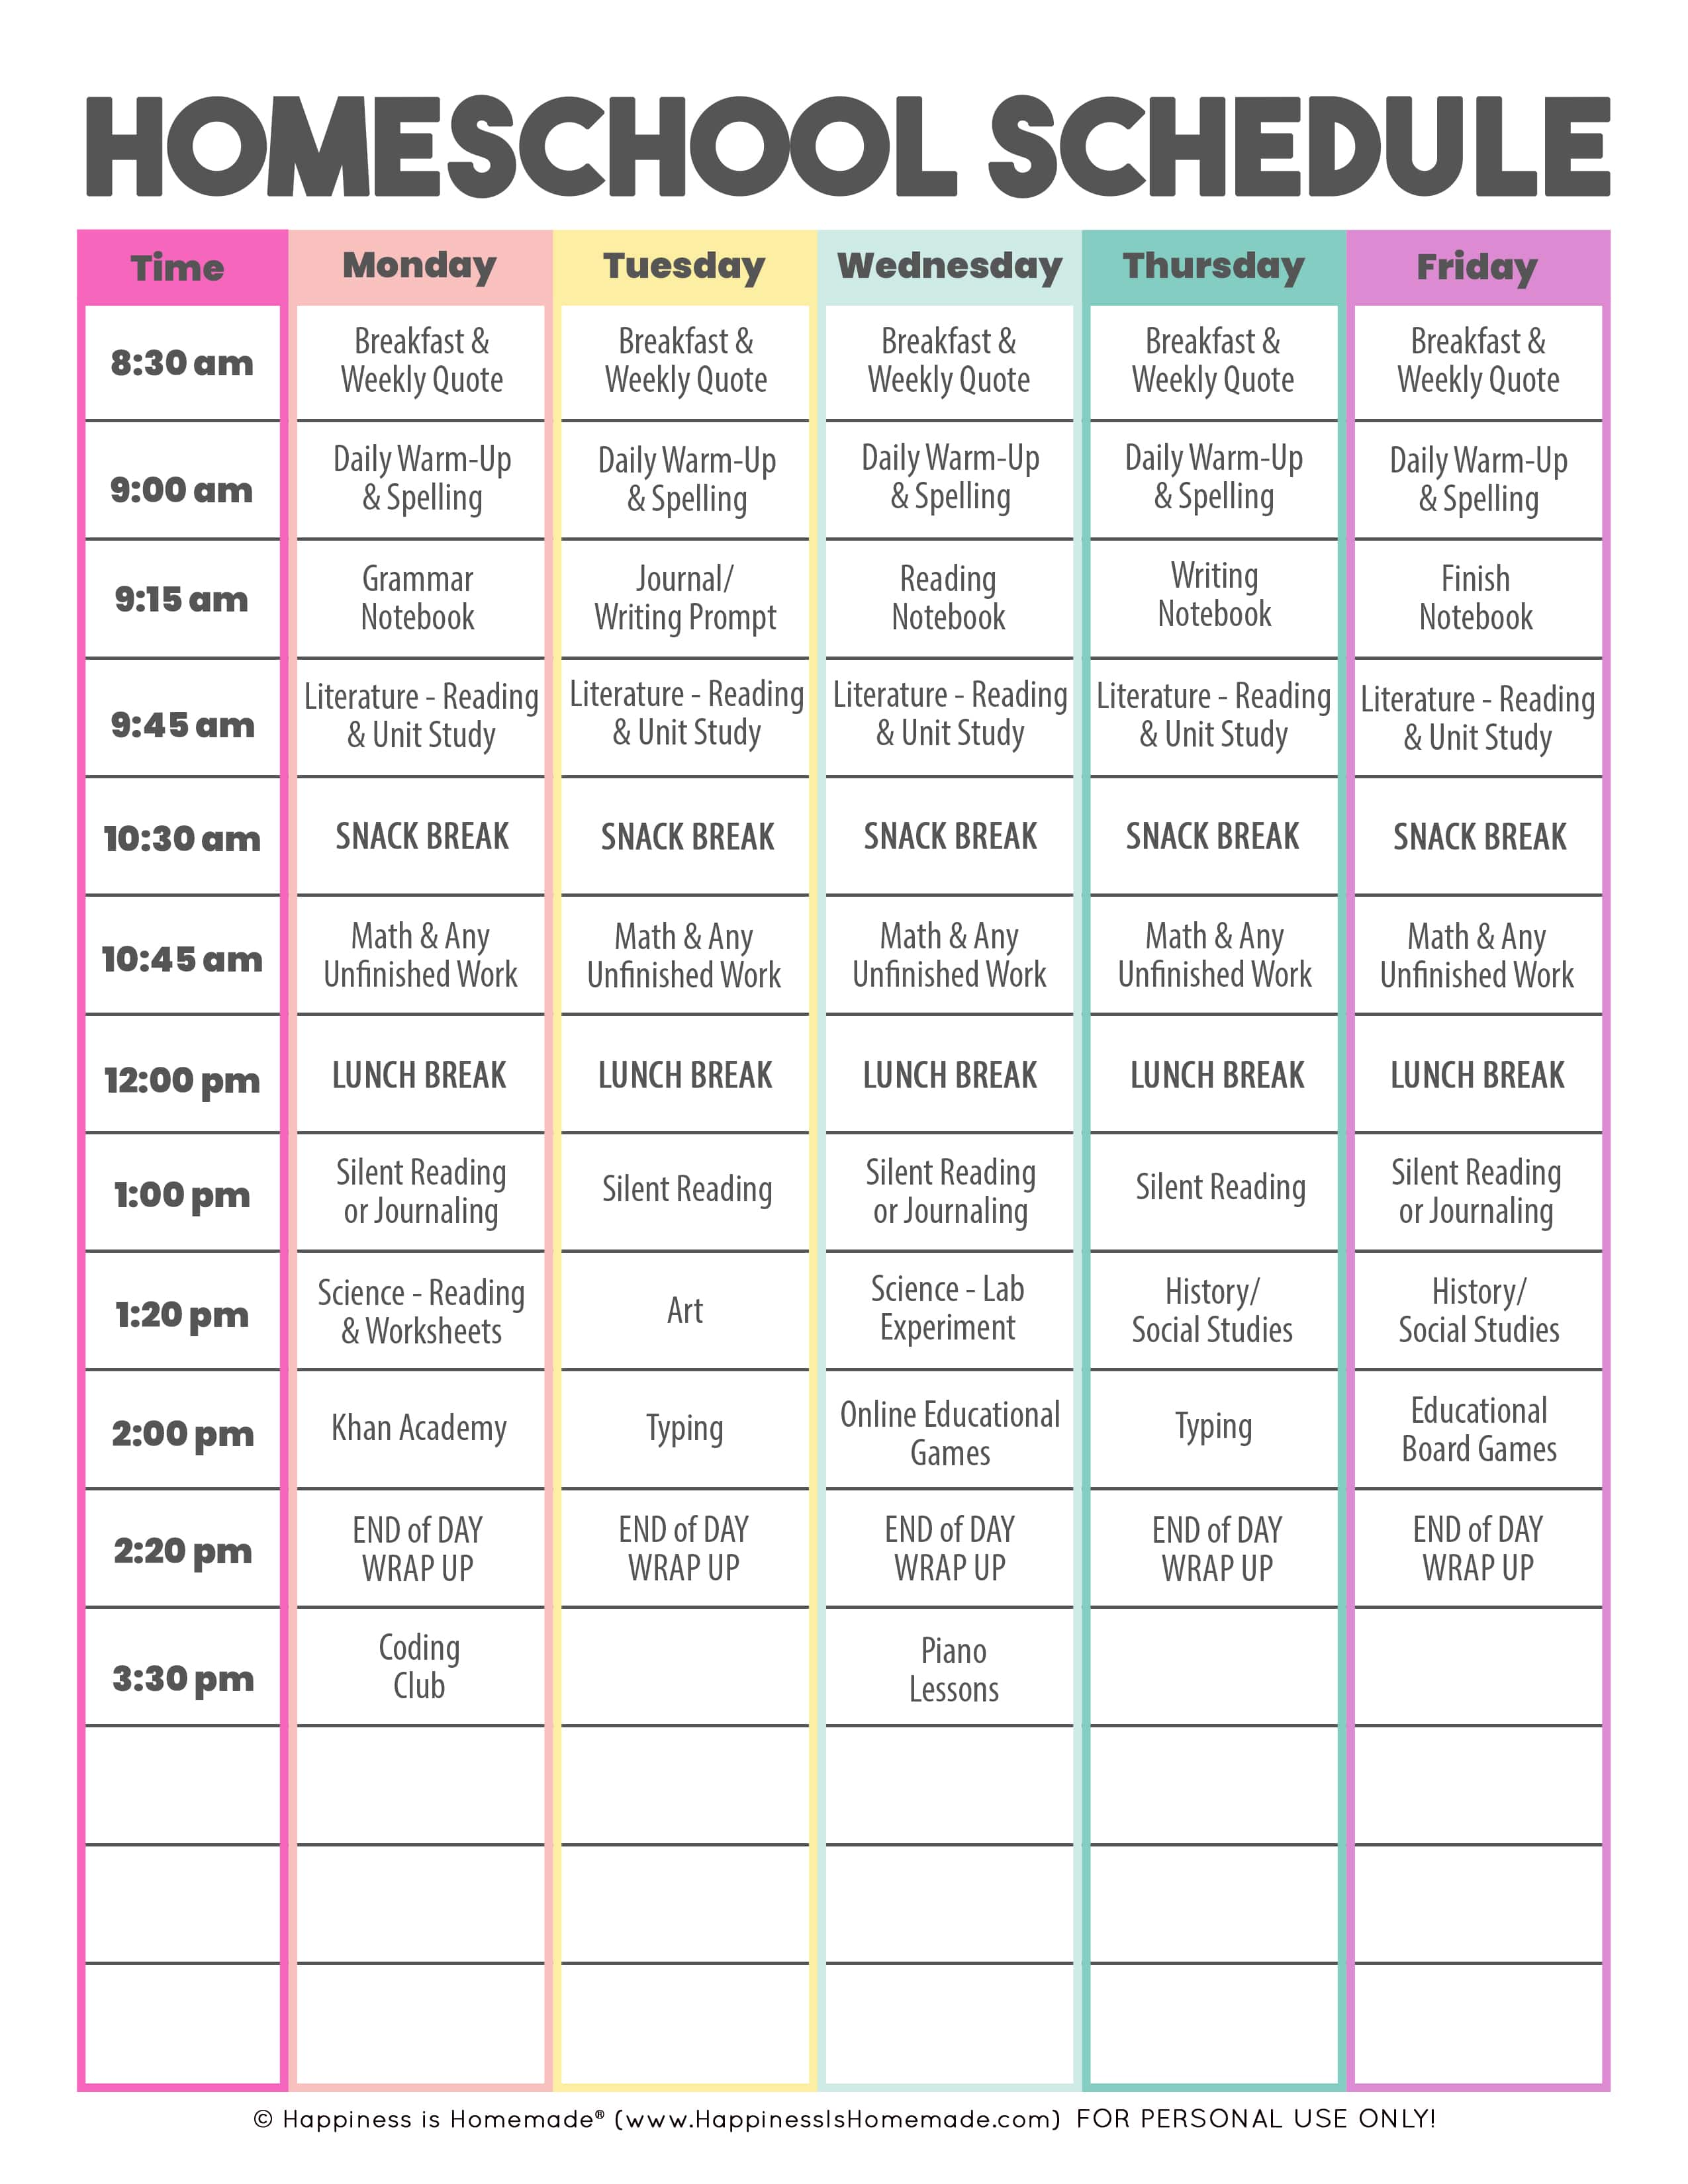 Homeschool Schedule Template: Free Printable Happiness is Homemade